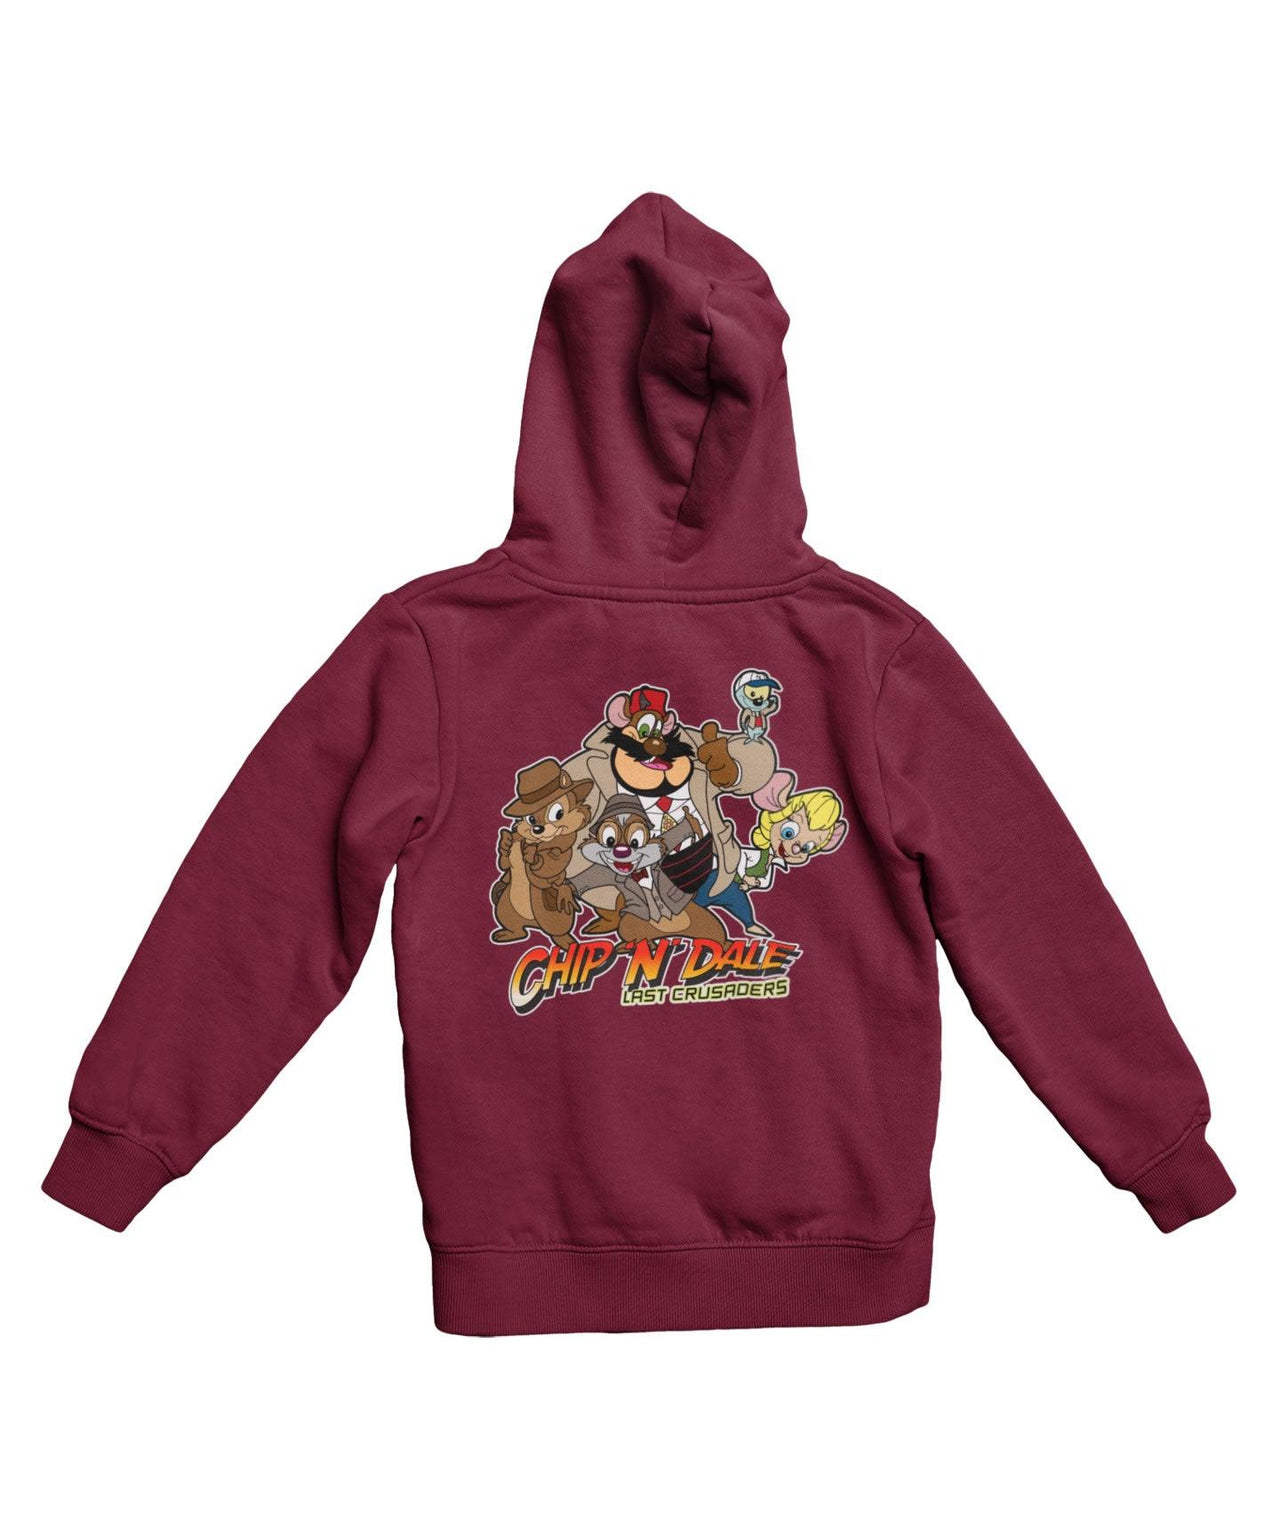 Top Notchy Chip N Dale Last Crusaders Back Printed Hoodie For Men and Women 8Ball